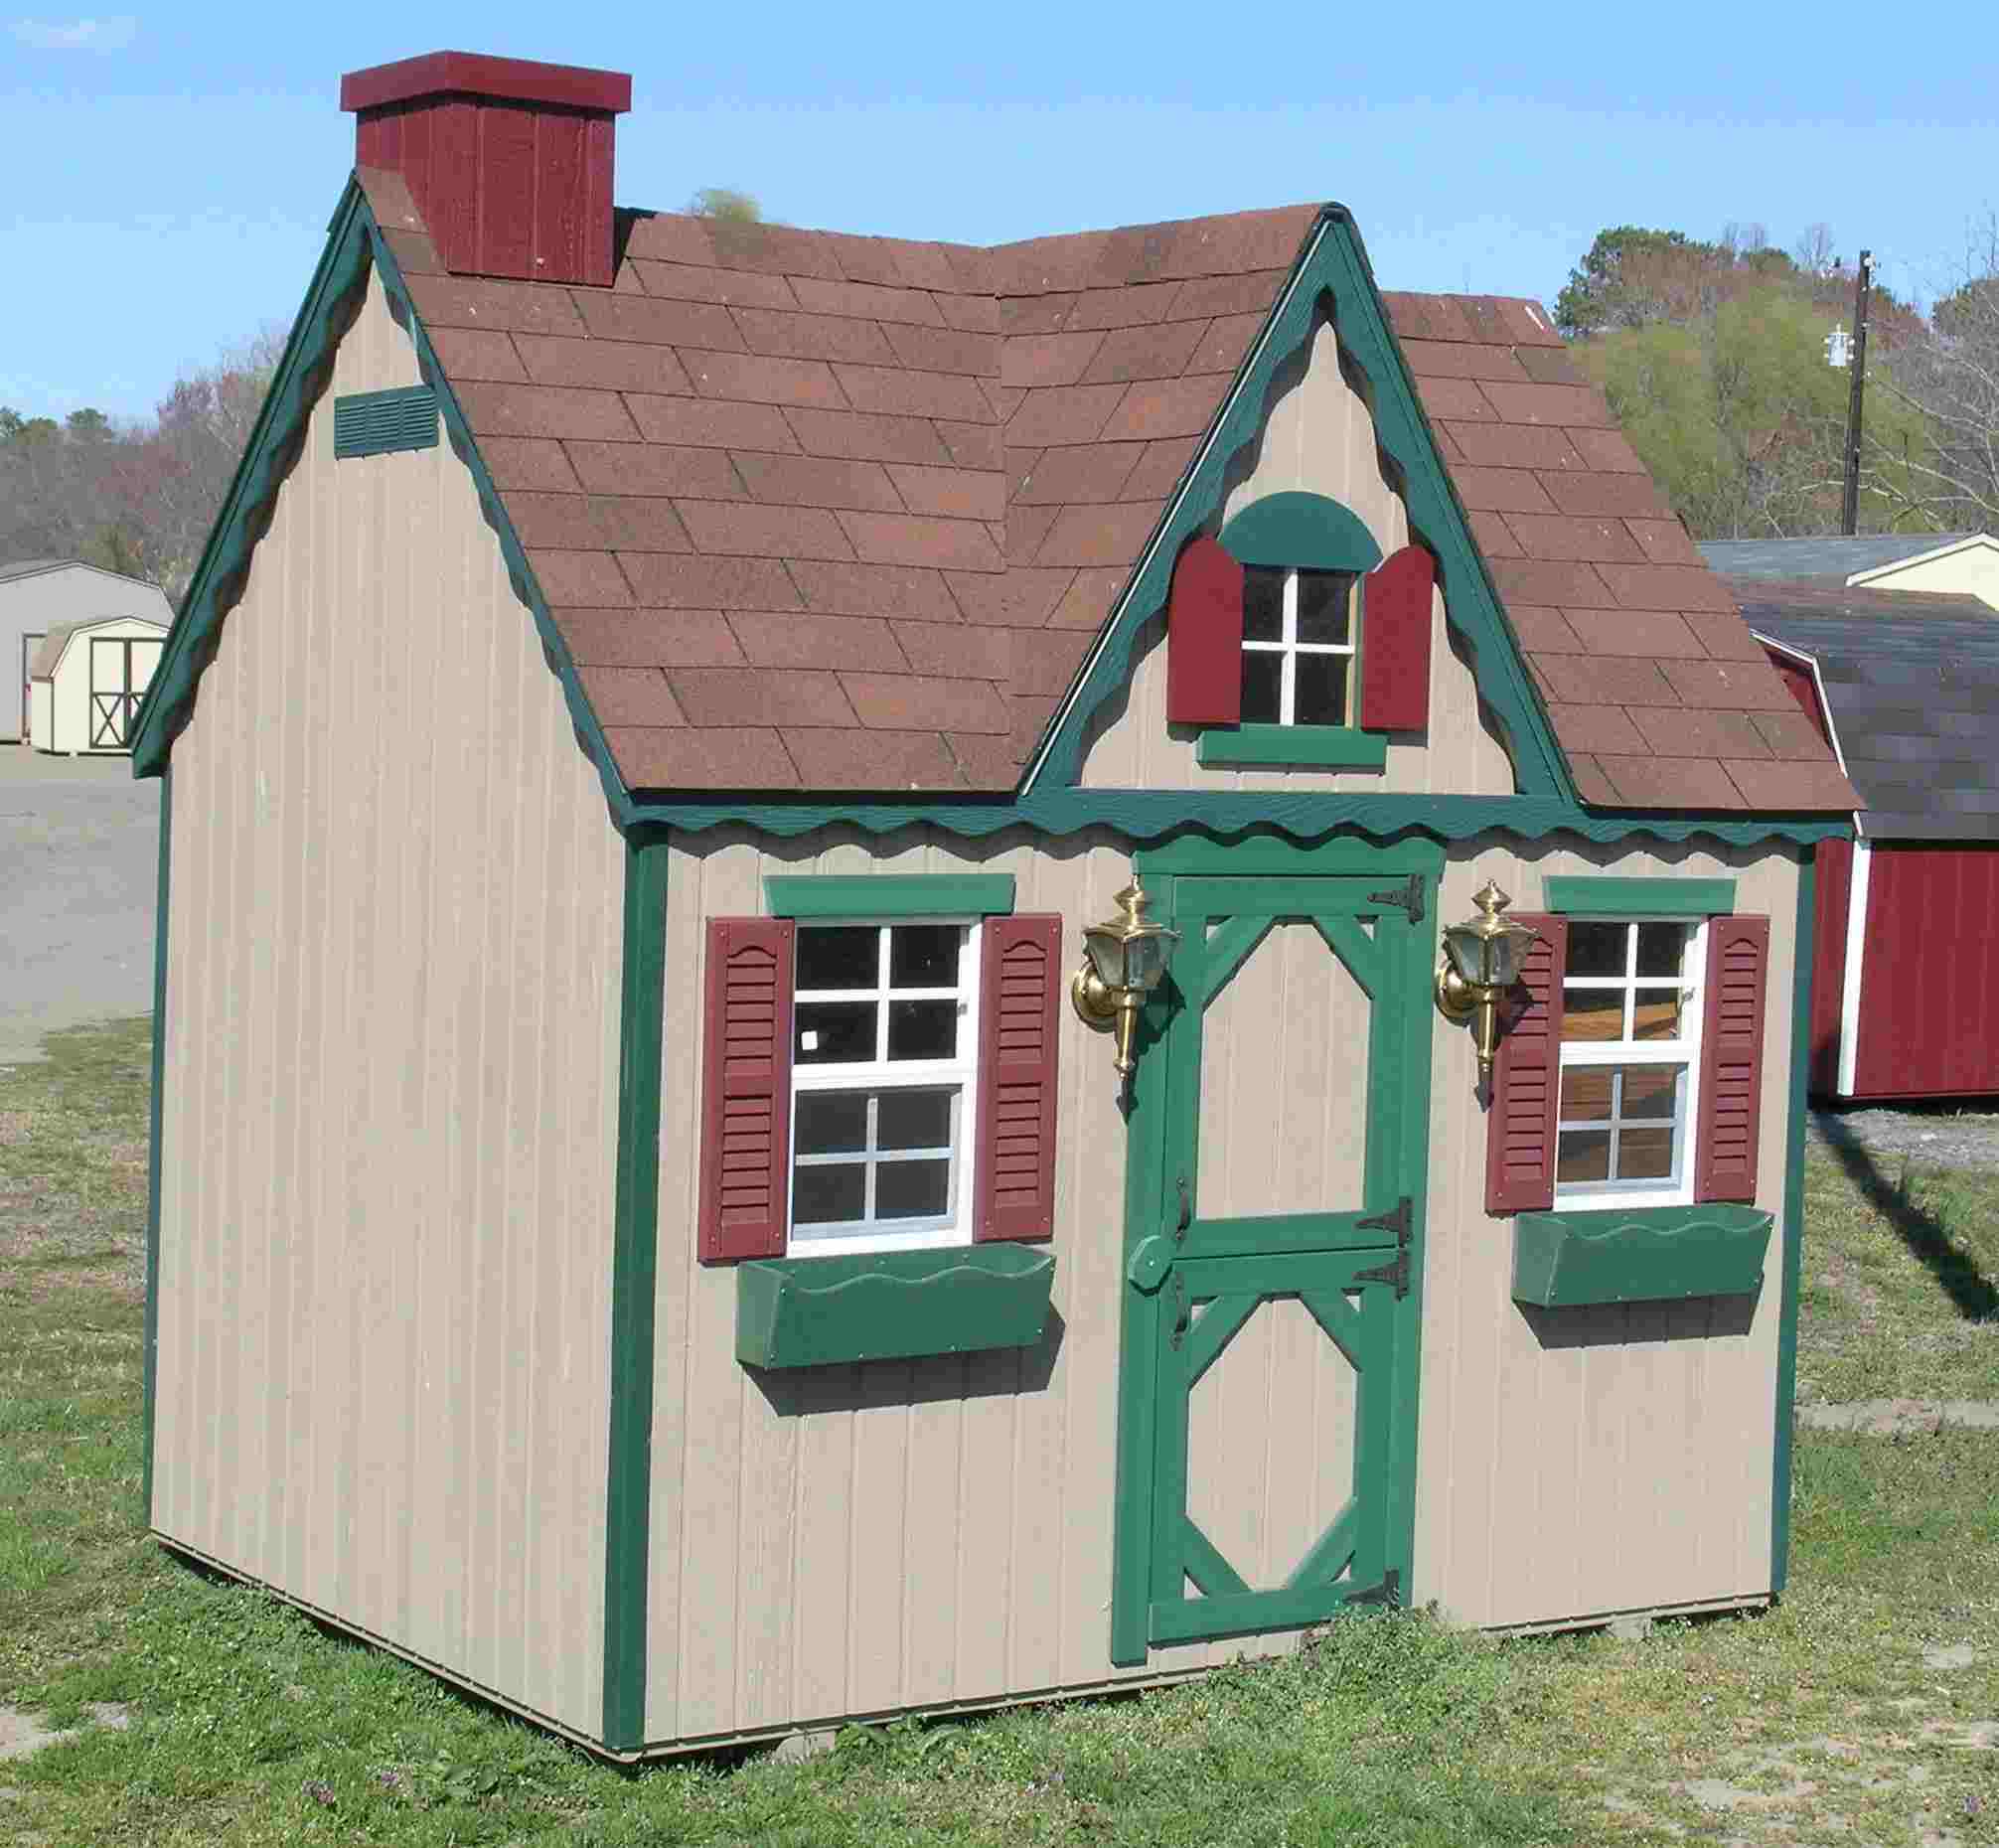 Victorian style playhouse with window boxes.